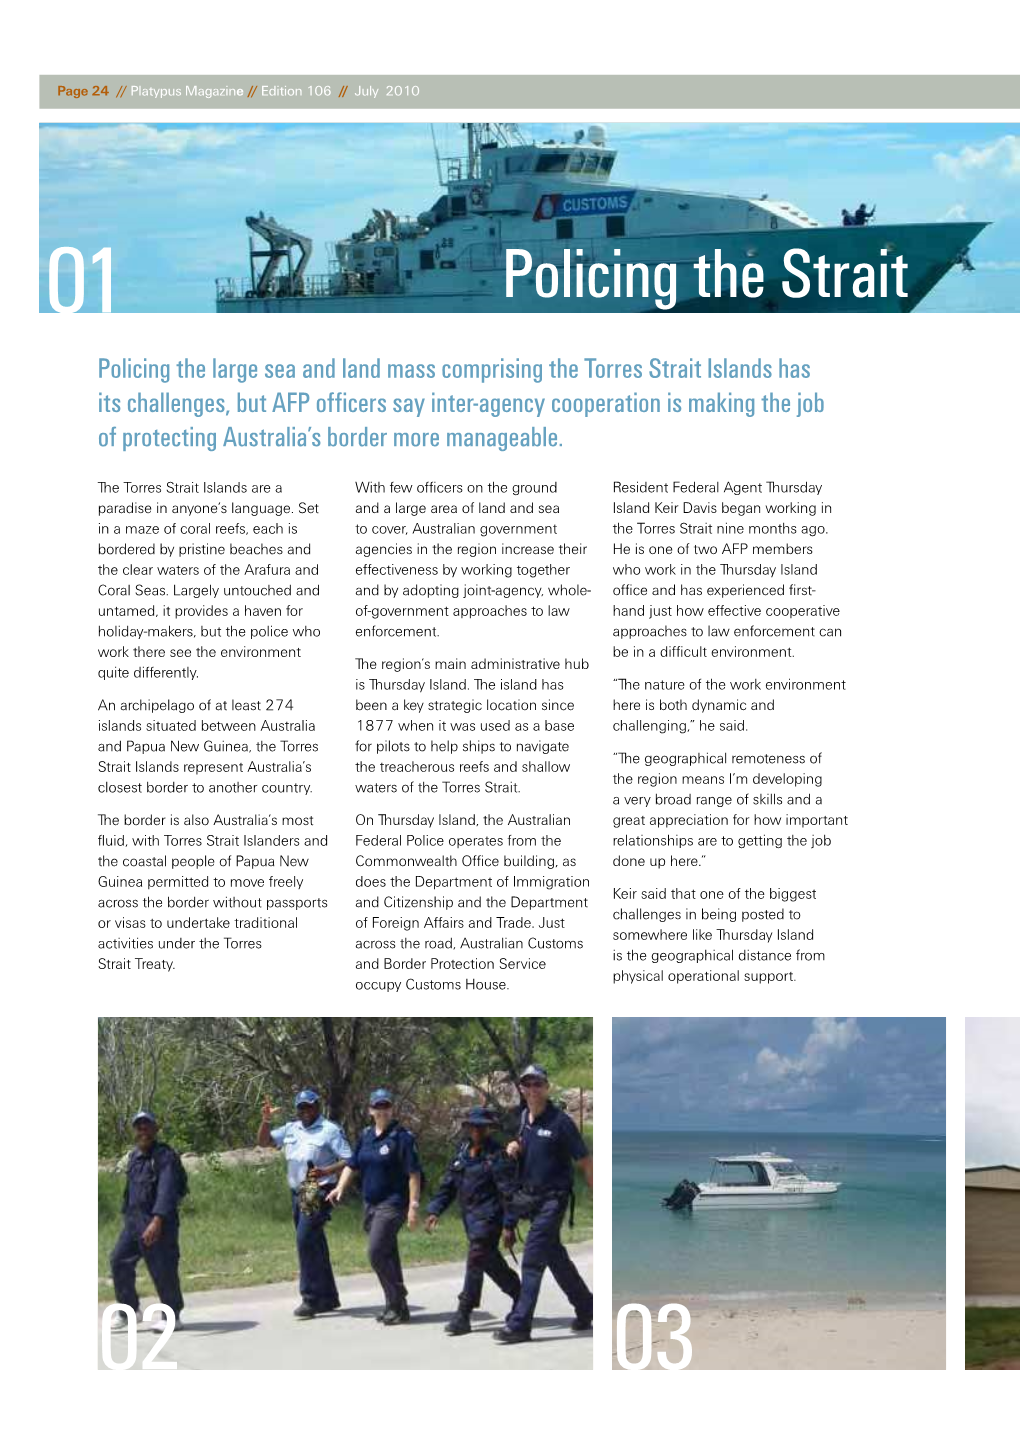 Policing the Strait